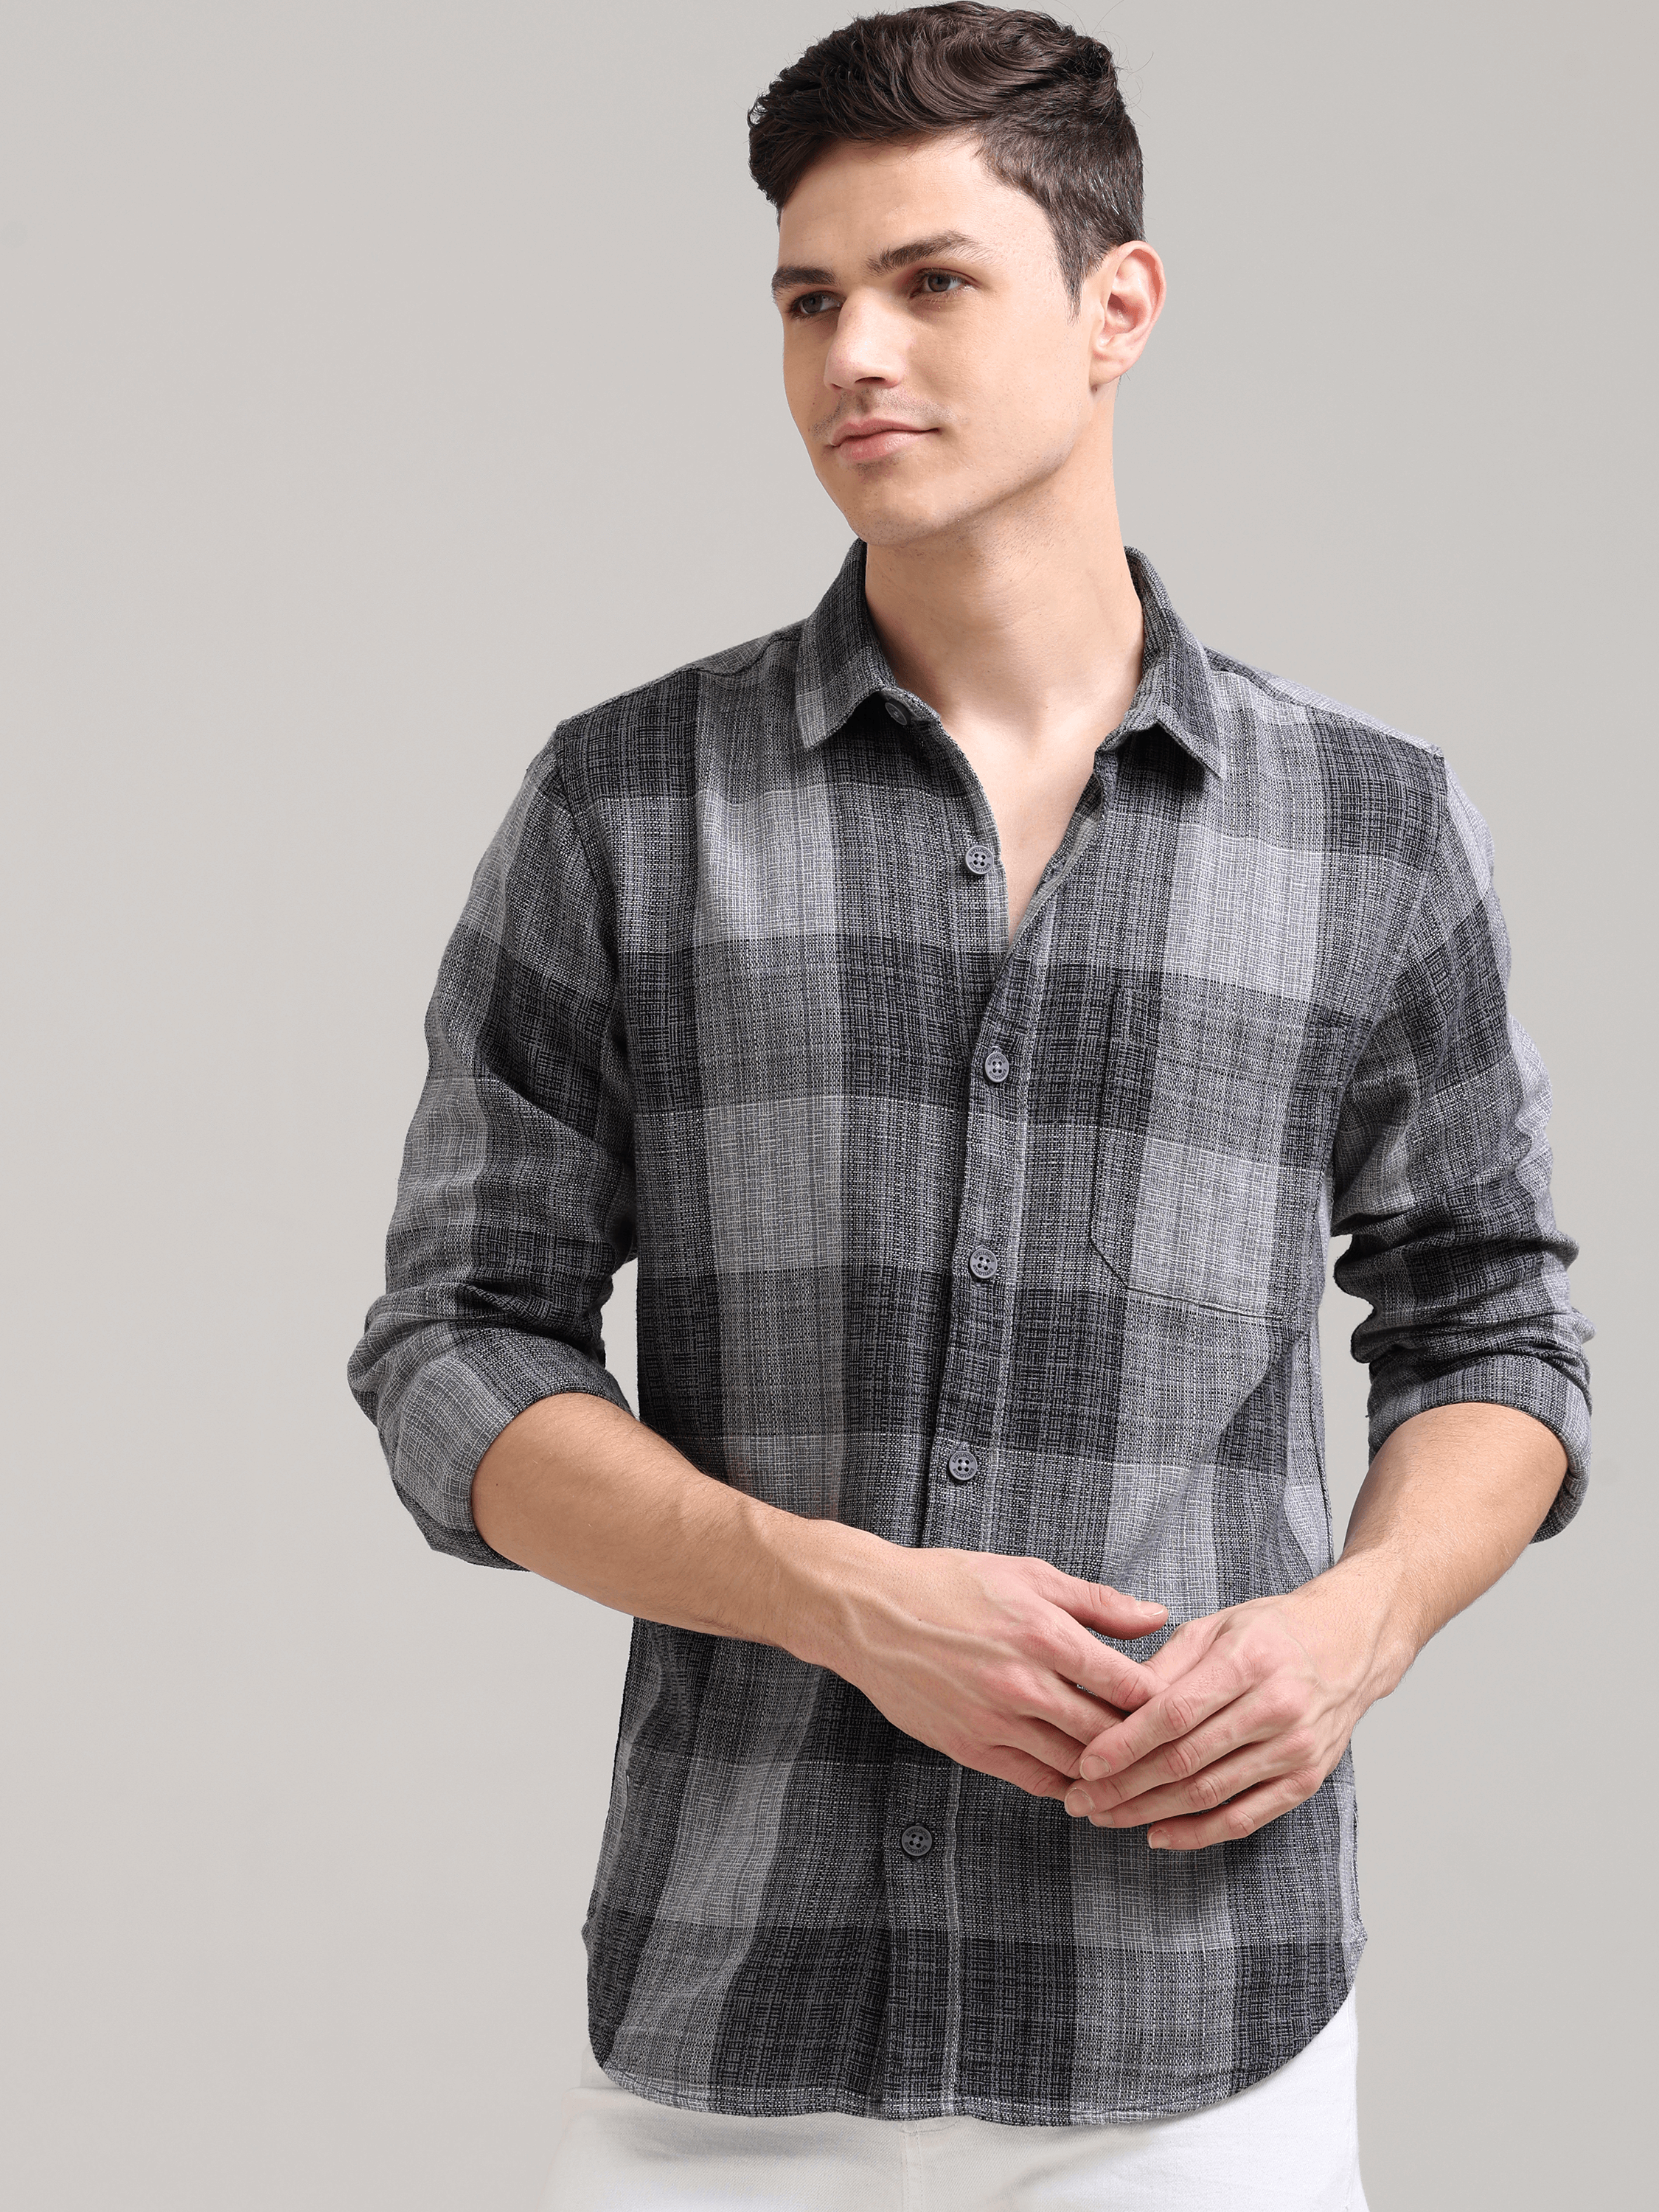 Quiet Shade Grey Casual Check Shirt shop online at Estilocus. 100% Cotton • Full-sleeve check shirt• Cut and sew placket• Regular collar• Double button edge cuff• Single pocket • Curved bottom hemline .• All double needle construction, finest quality sewi